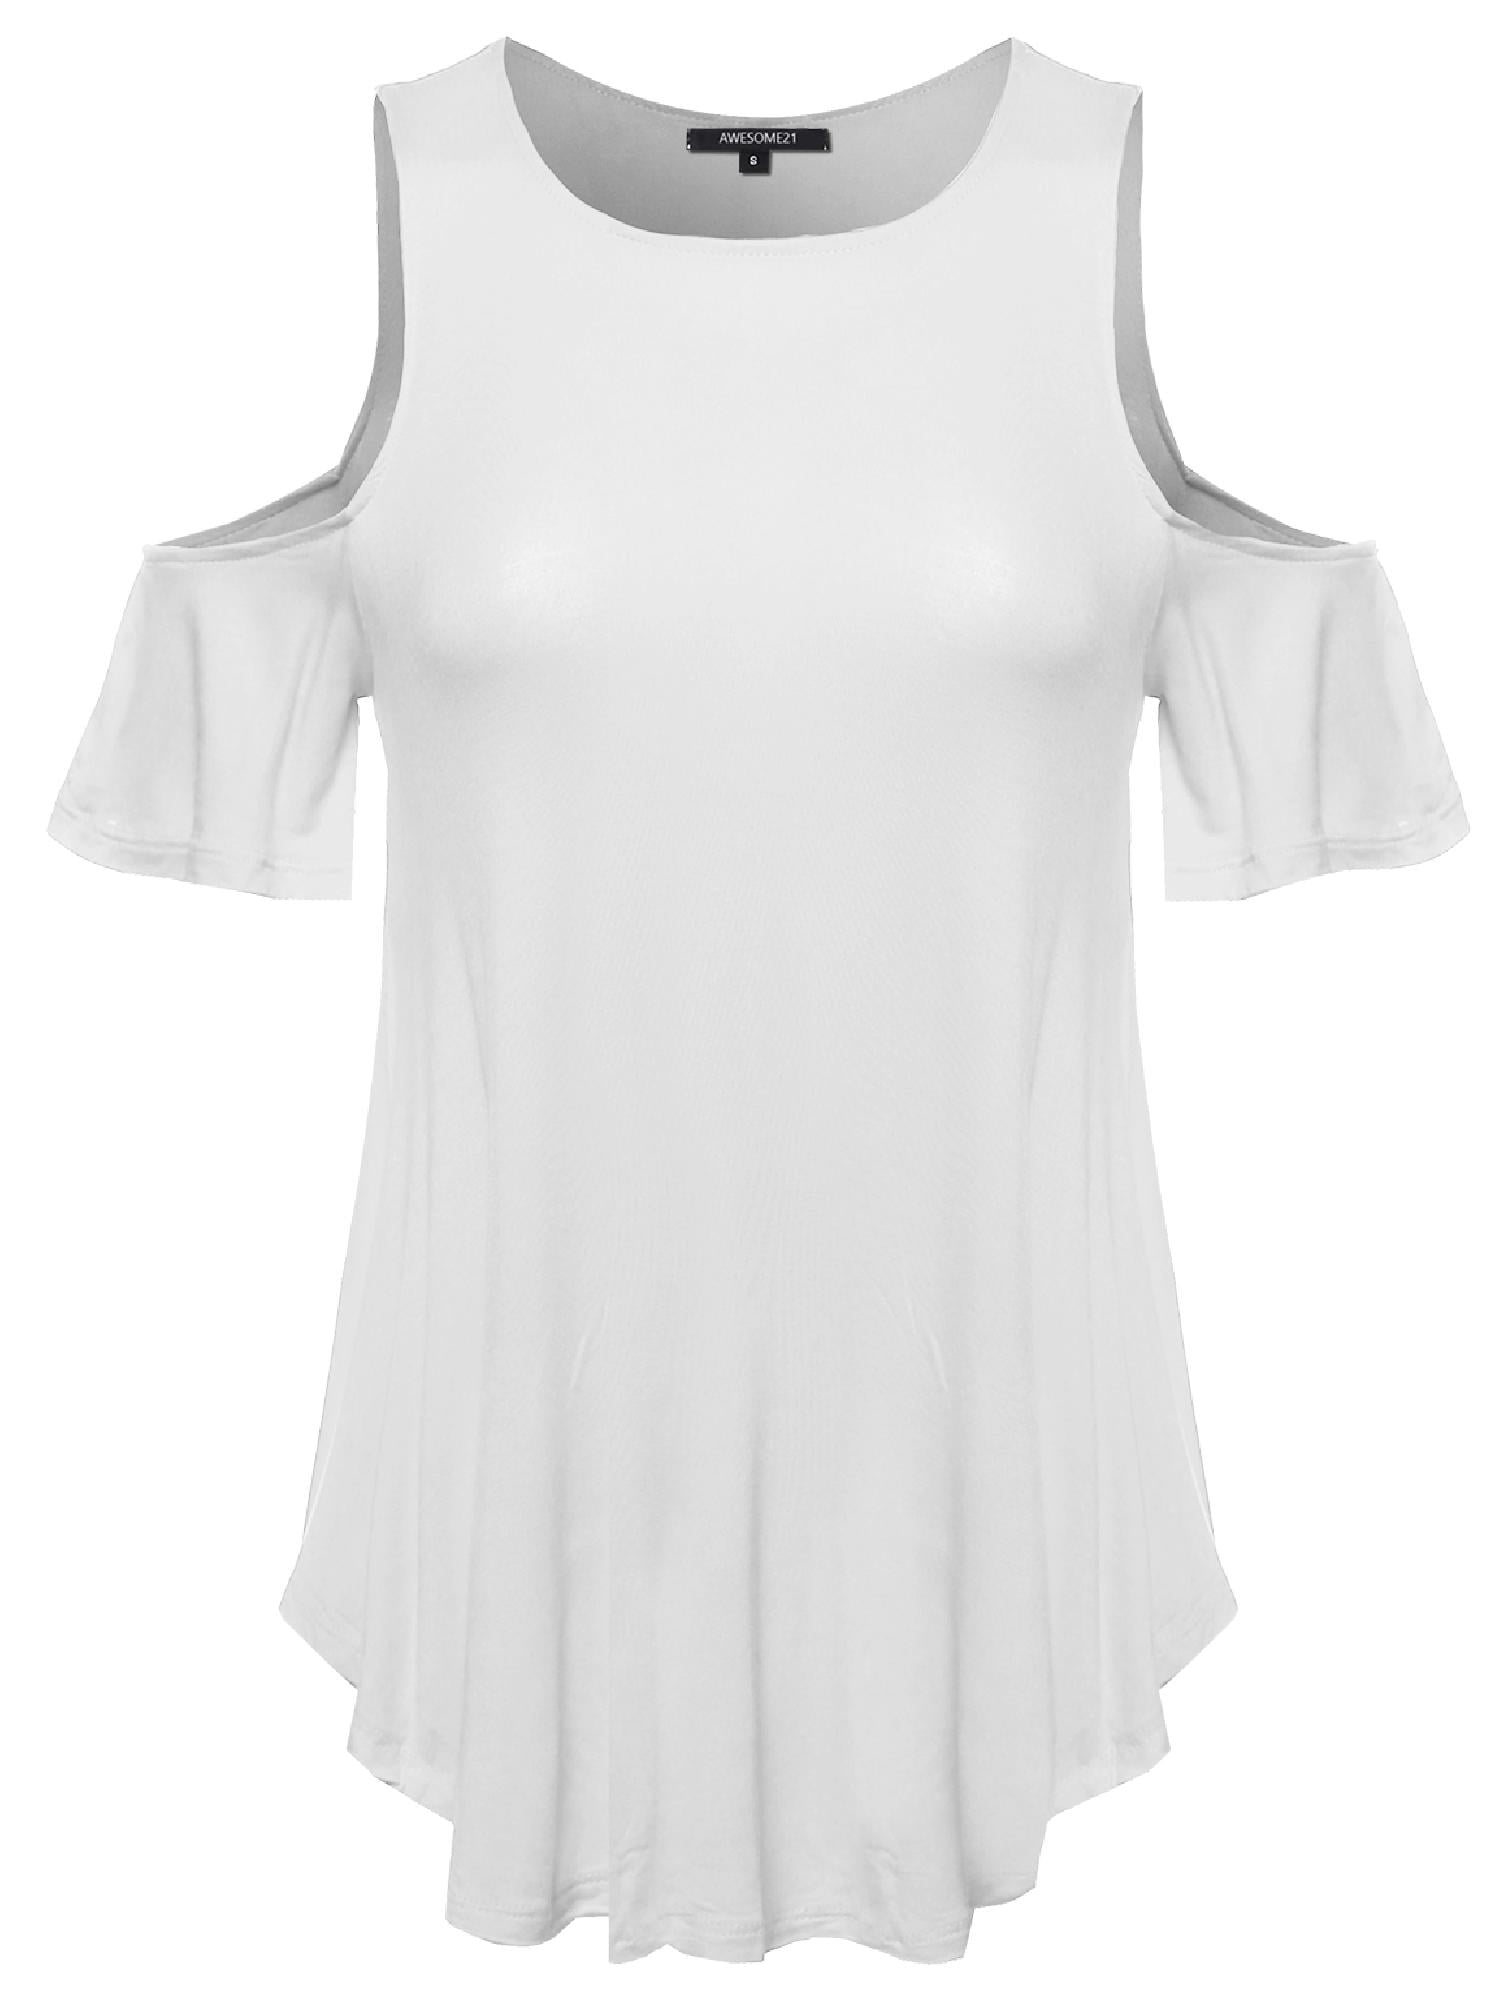 Awesome21 Womens Cold Shoulder Solid Top